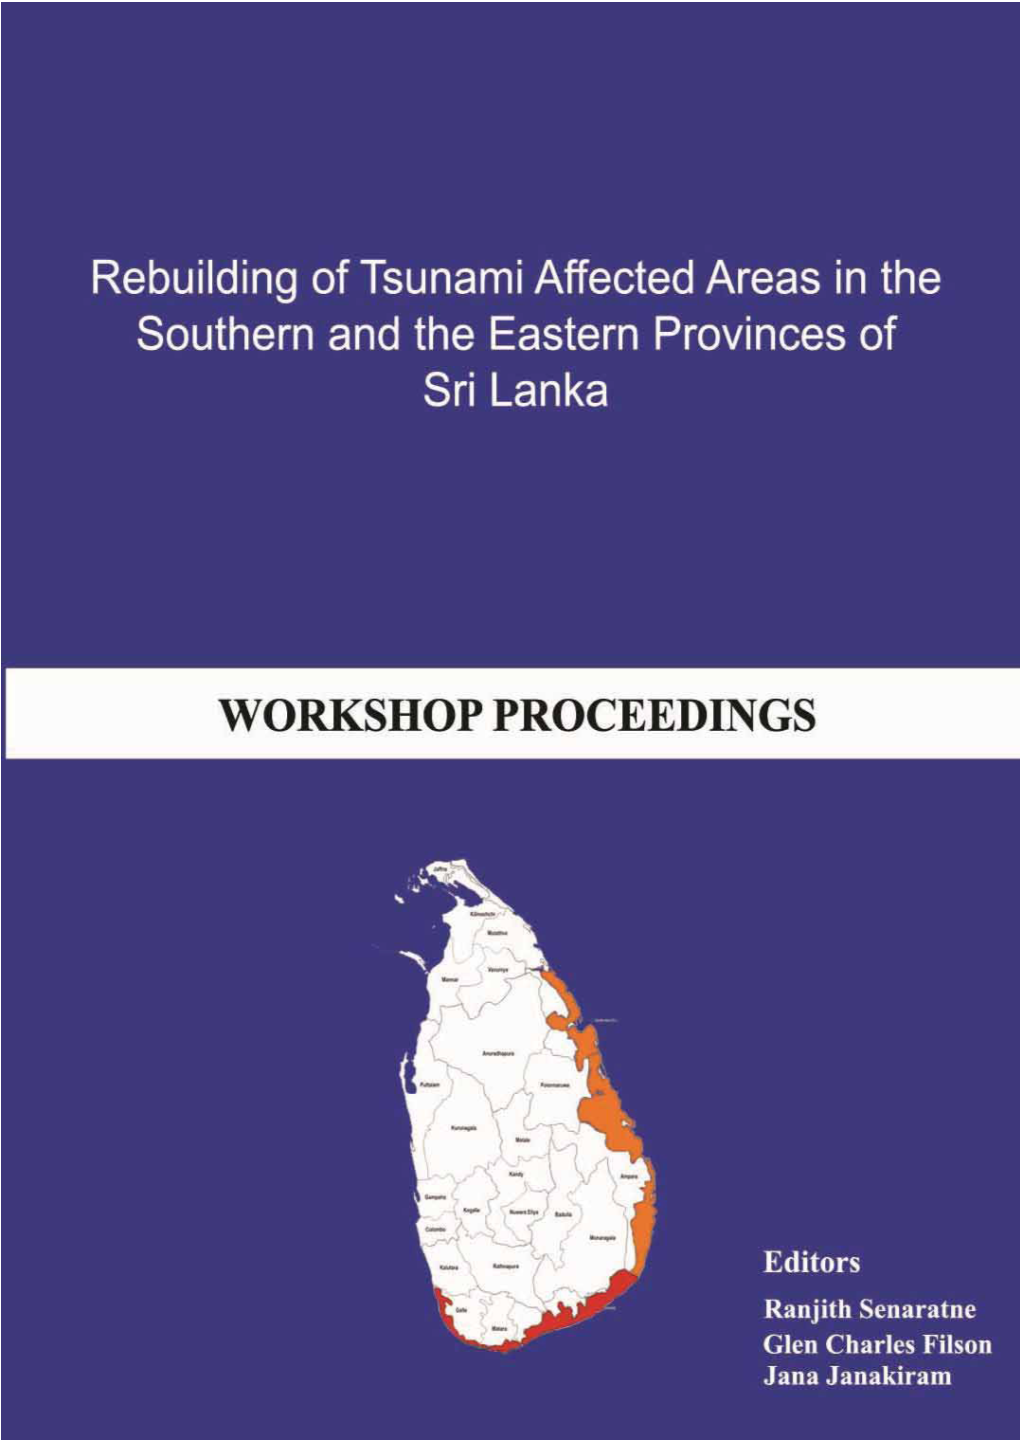 Rebuilding of Tsunami Affected Areas in the Southern and the Eastern Provinces of Sri Lanka